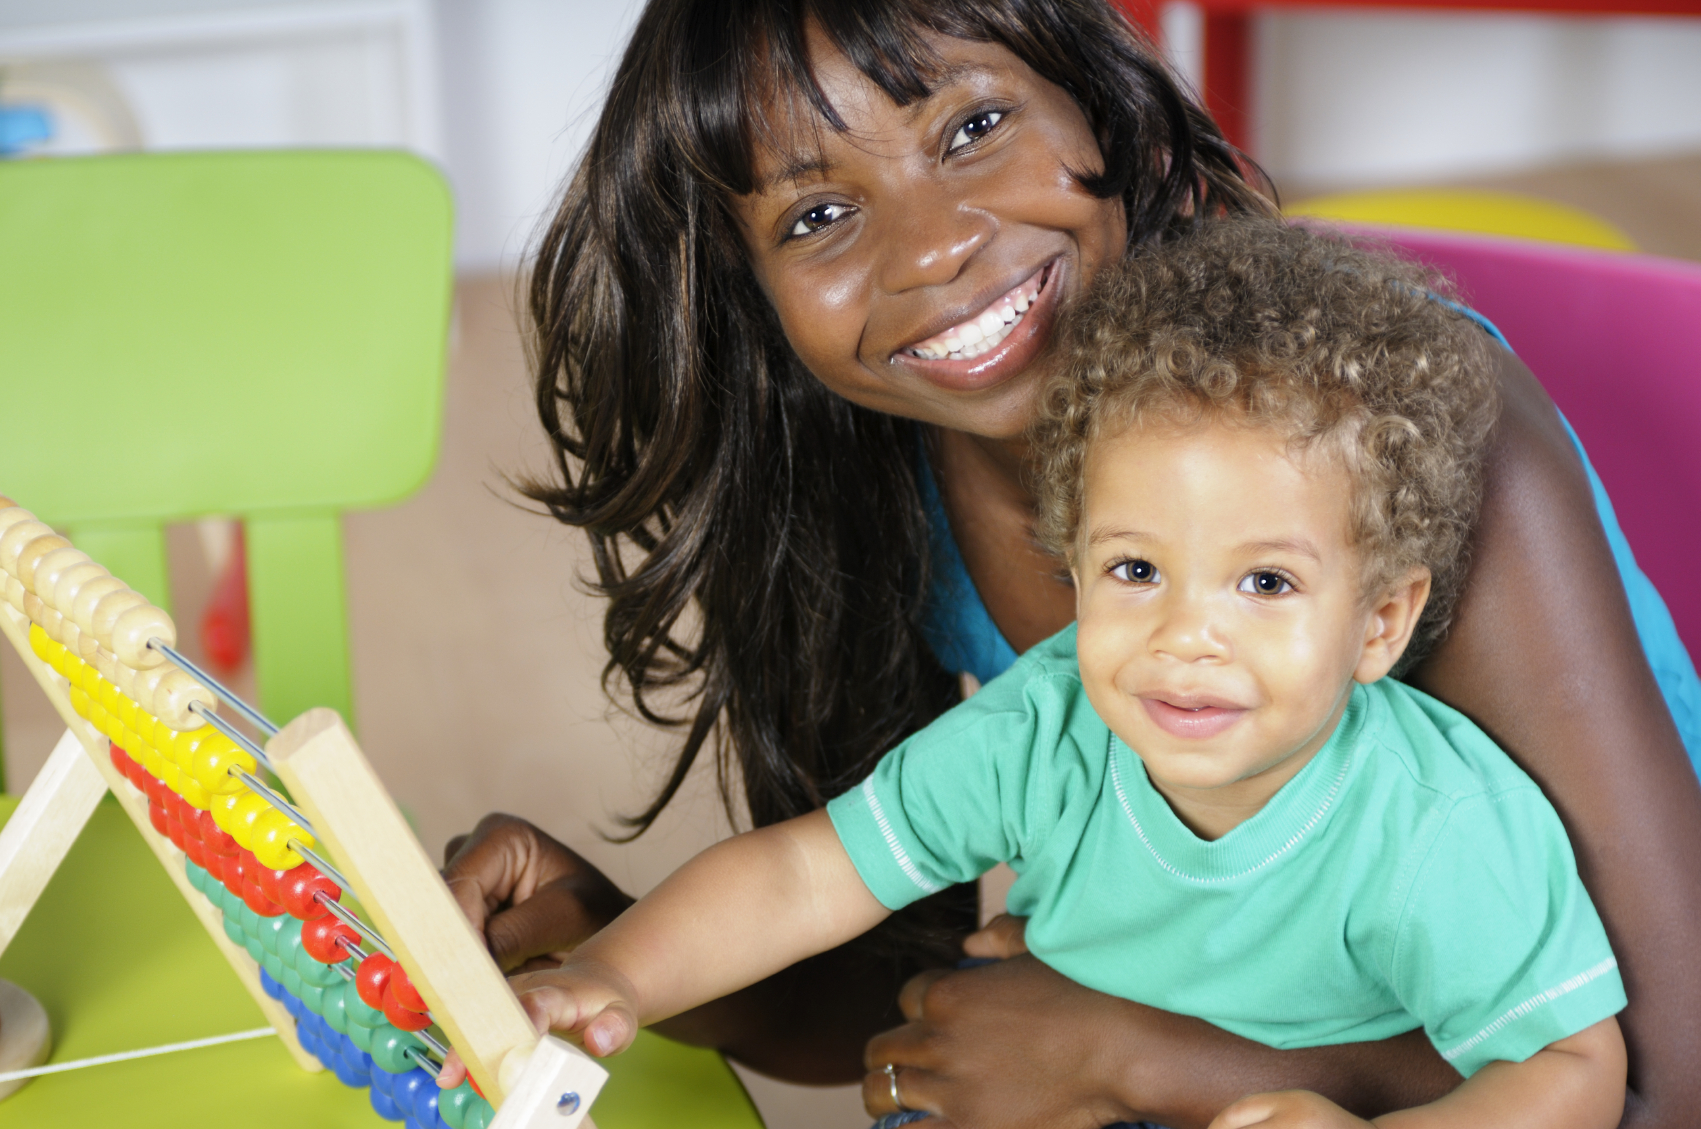 Child Development and Guidance Child Care Training Course